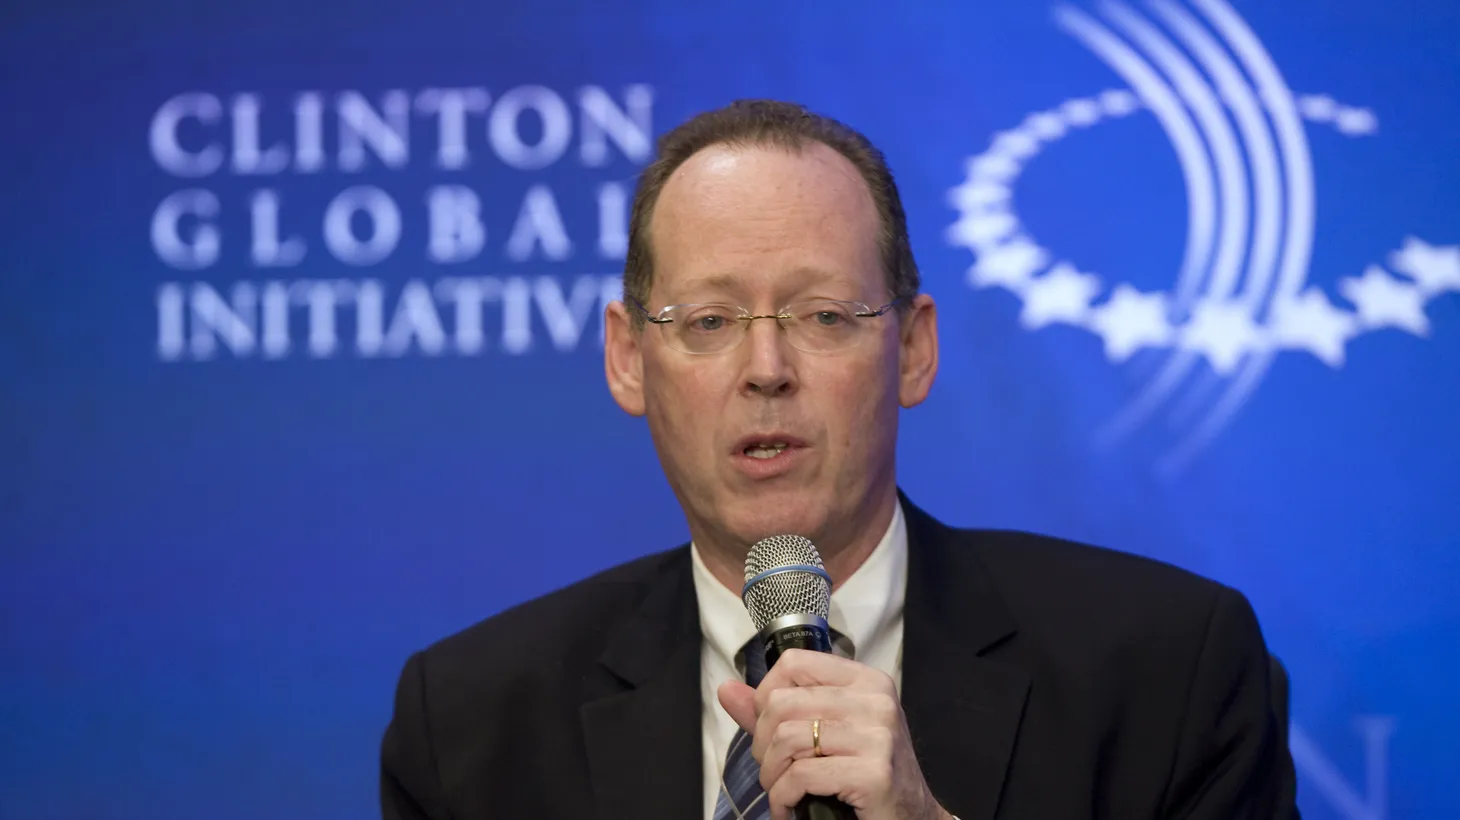 Dr. Paul Farmer, co-founder of Partners in Health, speaks during a discussion regarding initiatives to combat non-communicable diseases at the Clinton Global Initiative in New York, September 21, 2011.